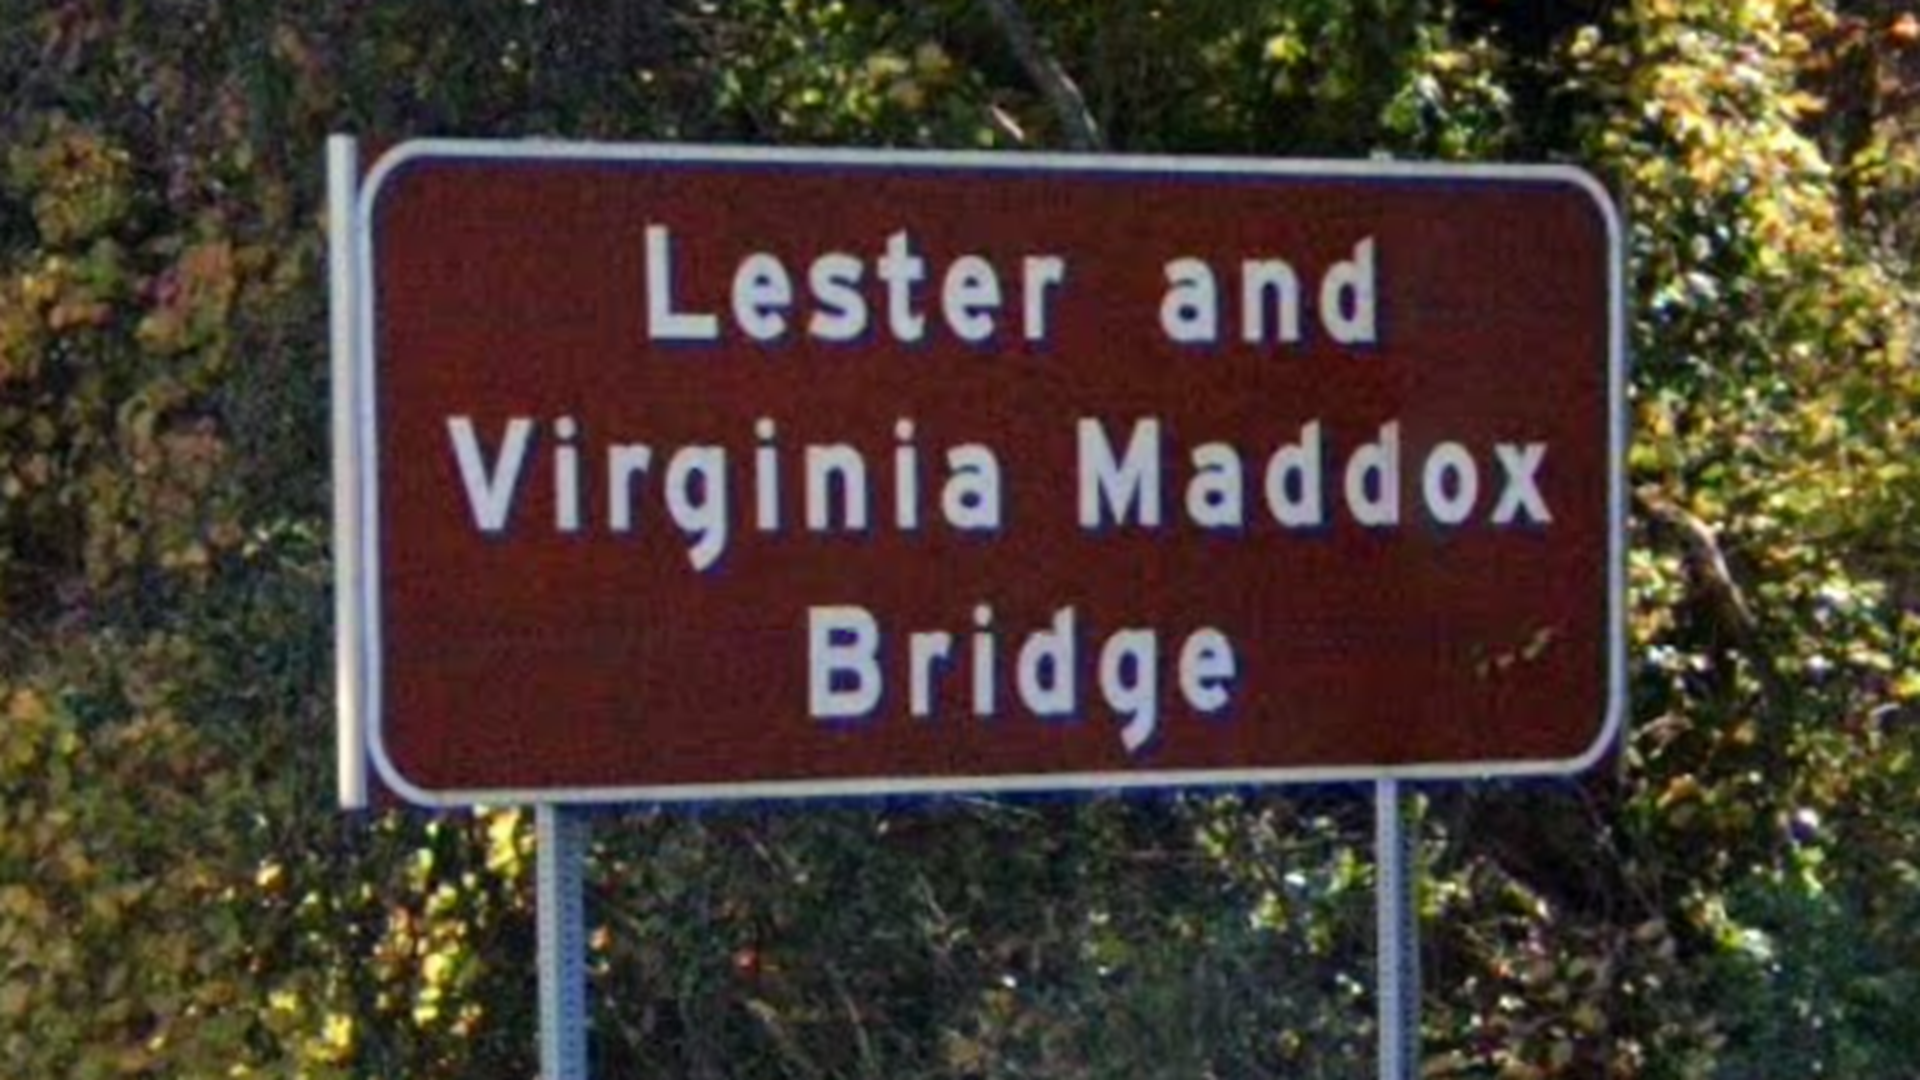 A bridge on I-75 is currently named for Georgia's segregationist governor.